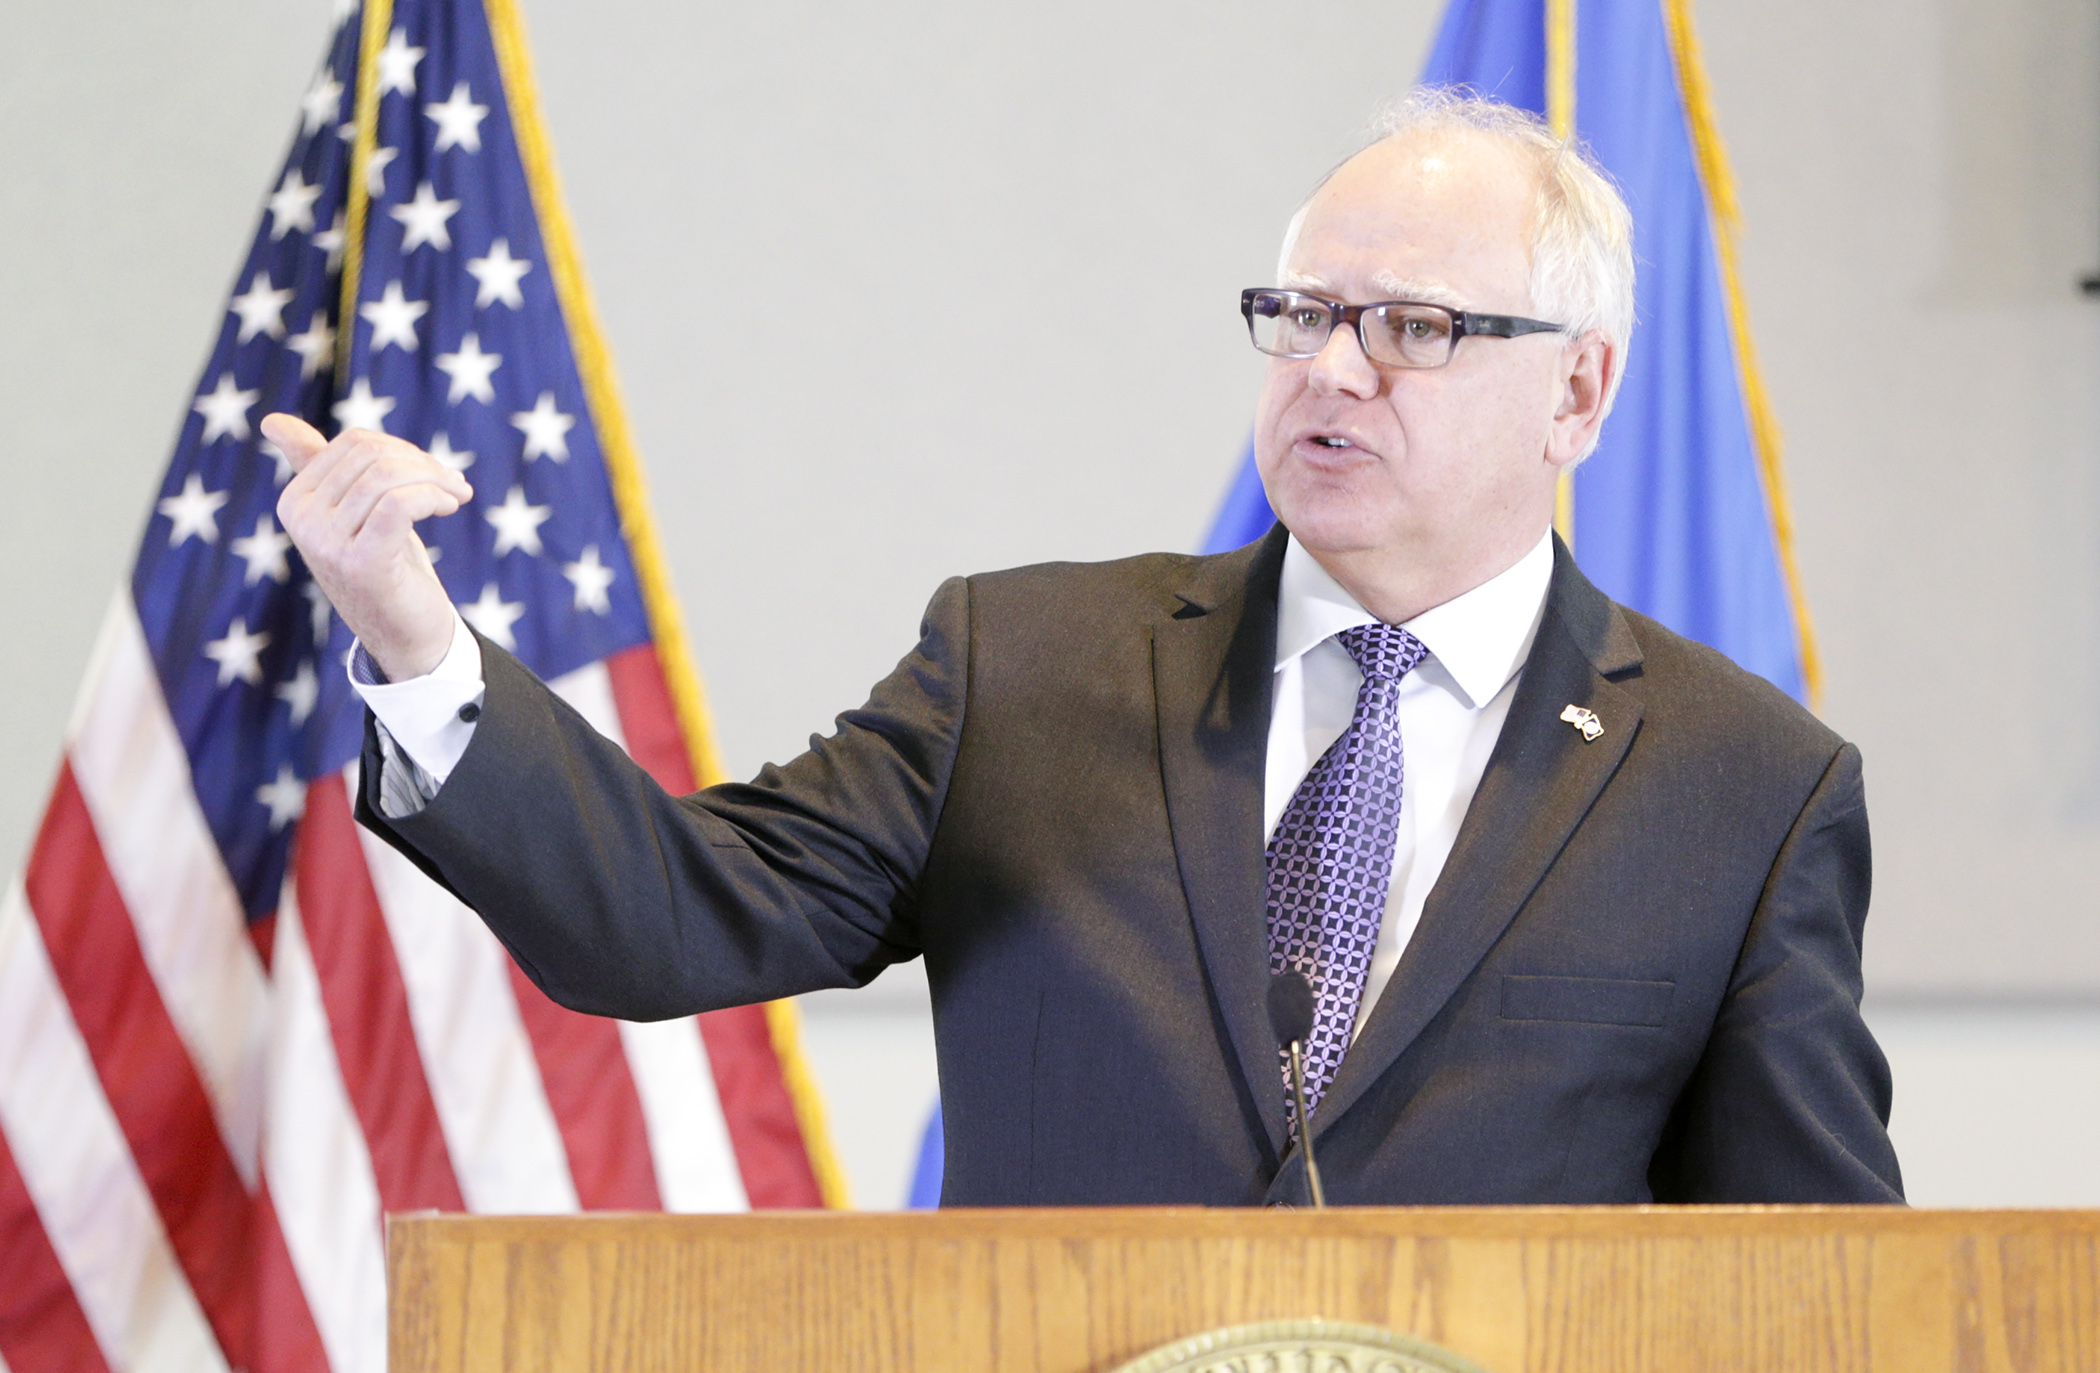 Gov. Tim Walz responds to February Budget and Economic Forecast which shows the state with a $1.05 billion budget surplus for the 2020-21 biennium. Photo by Paul Battaglia